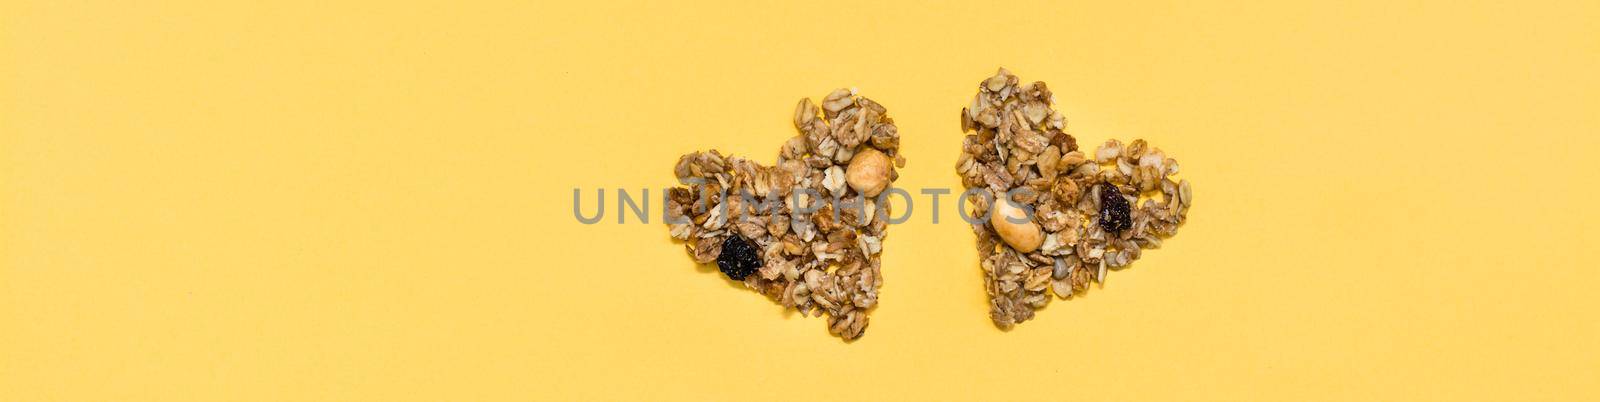 Love for healthy food. Granola made from oats, nuts and raisins in the form of two hearts on a yellow background. Top view. Web banner by Aleruana